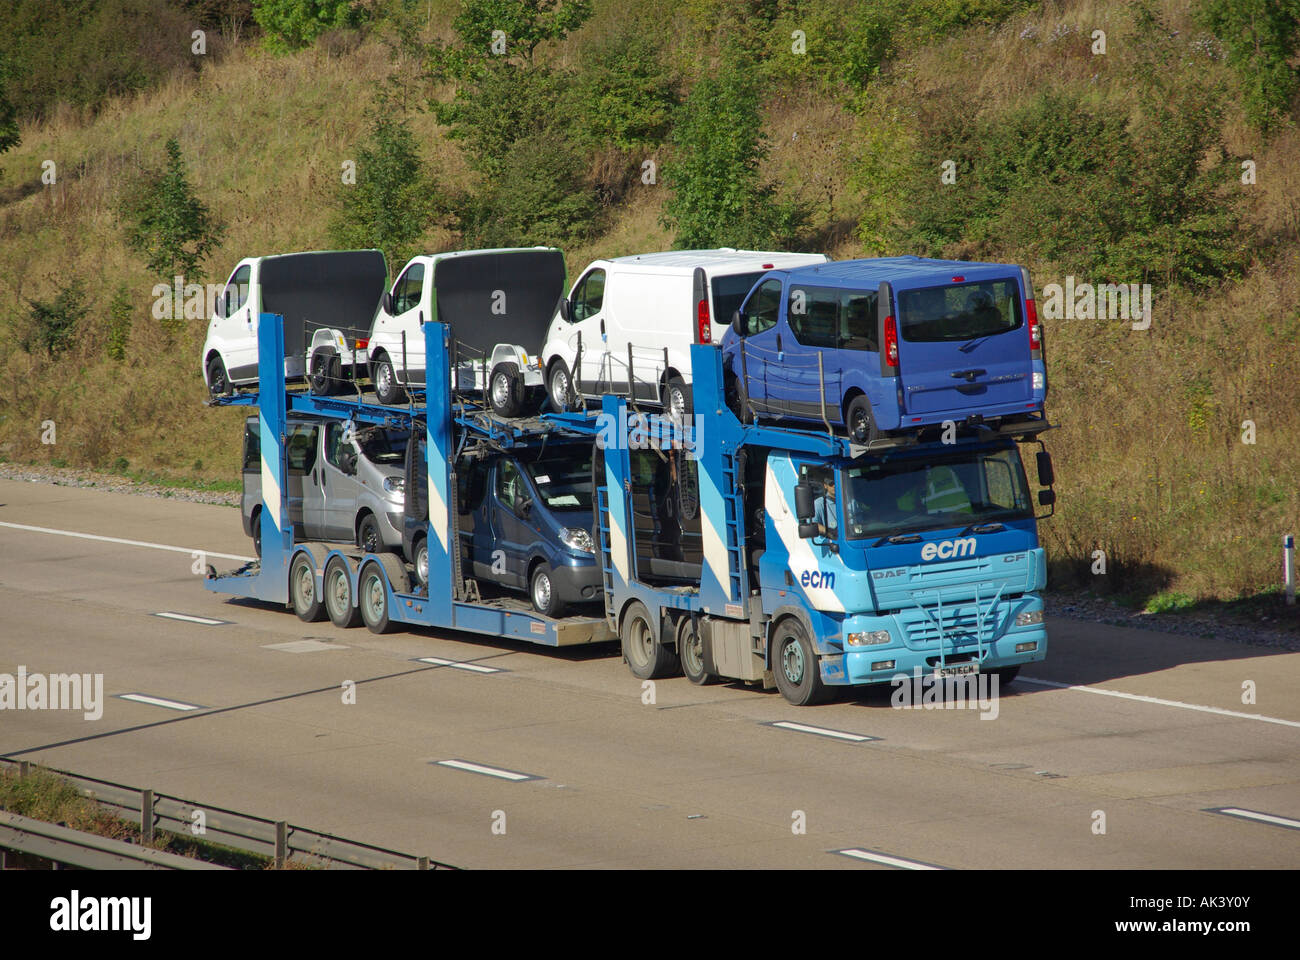 M25 motorway ECM new vans DAF delivery lorry loaded with Opel chassis cabs and mini buses Stock Photo